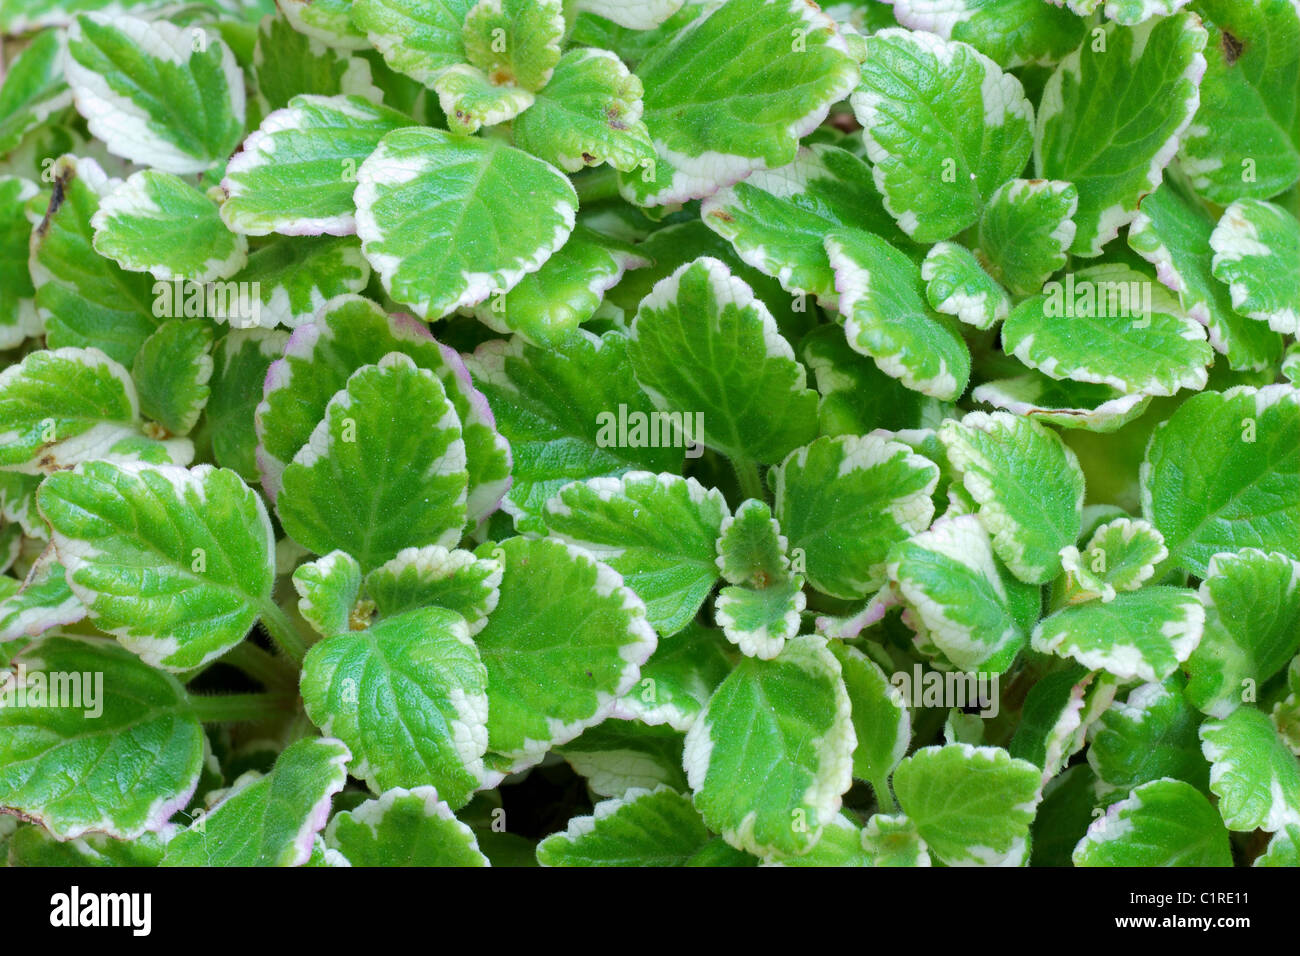 Texture of fresh green and white leaves Stock Photo